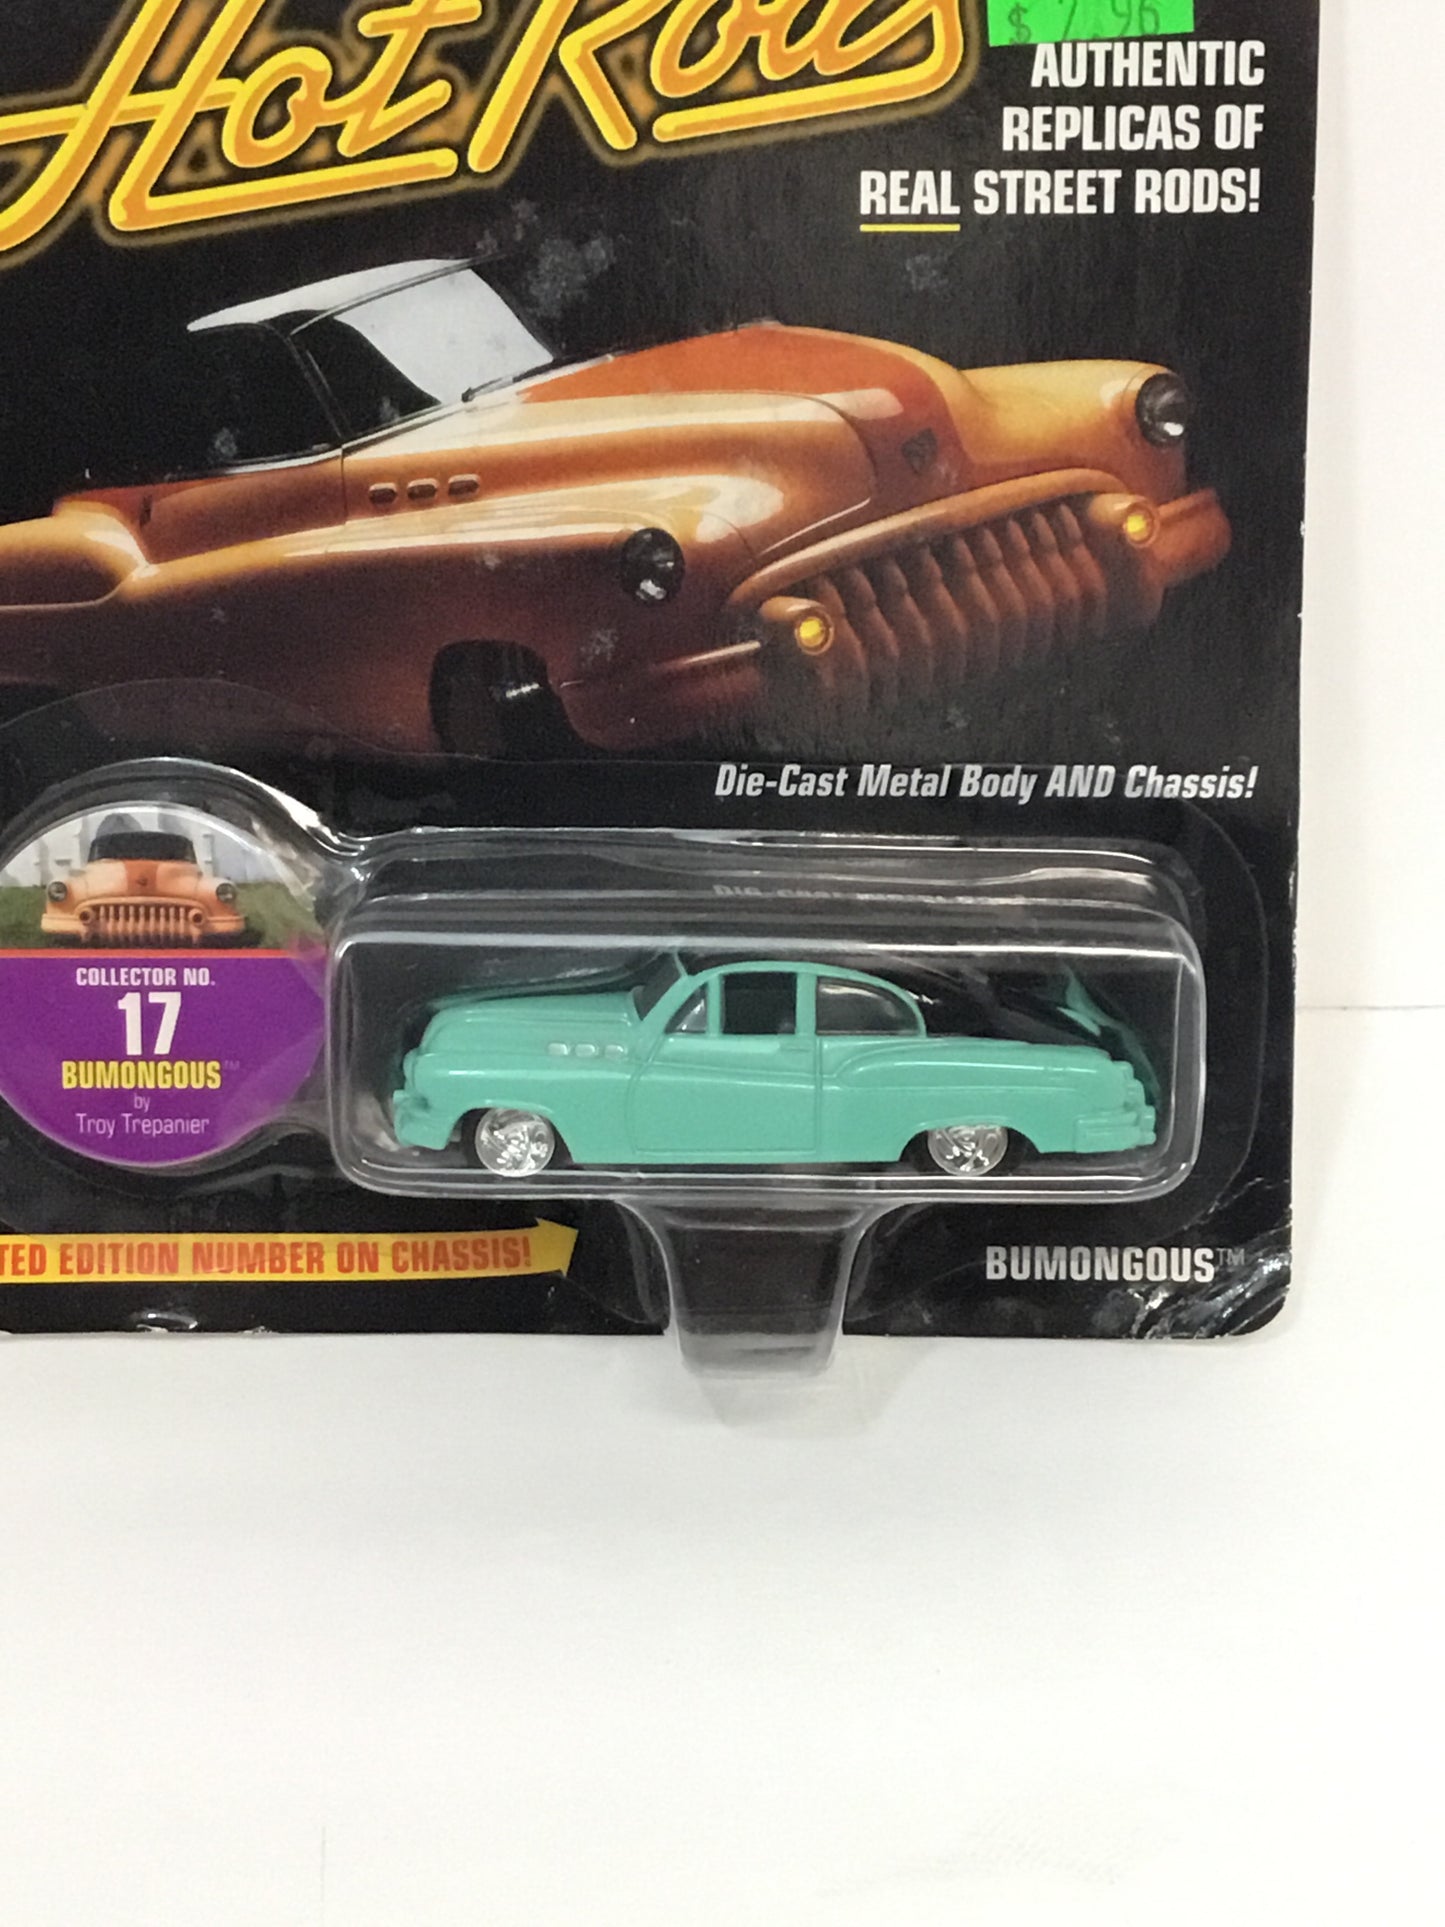 Johnny lightning Hot rods Bumongous (mint color) 207B